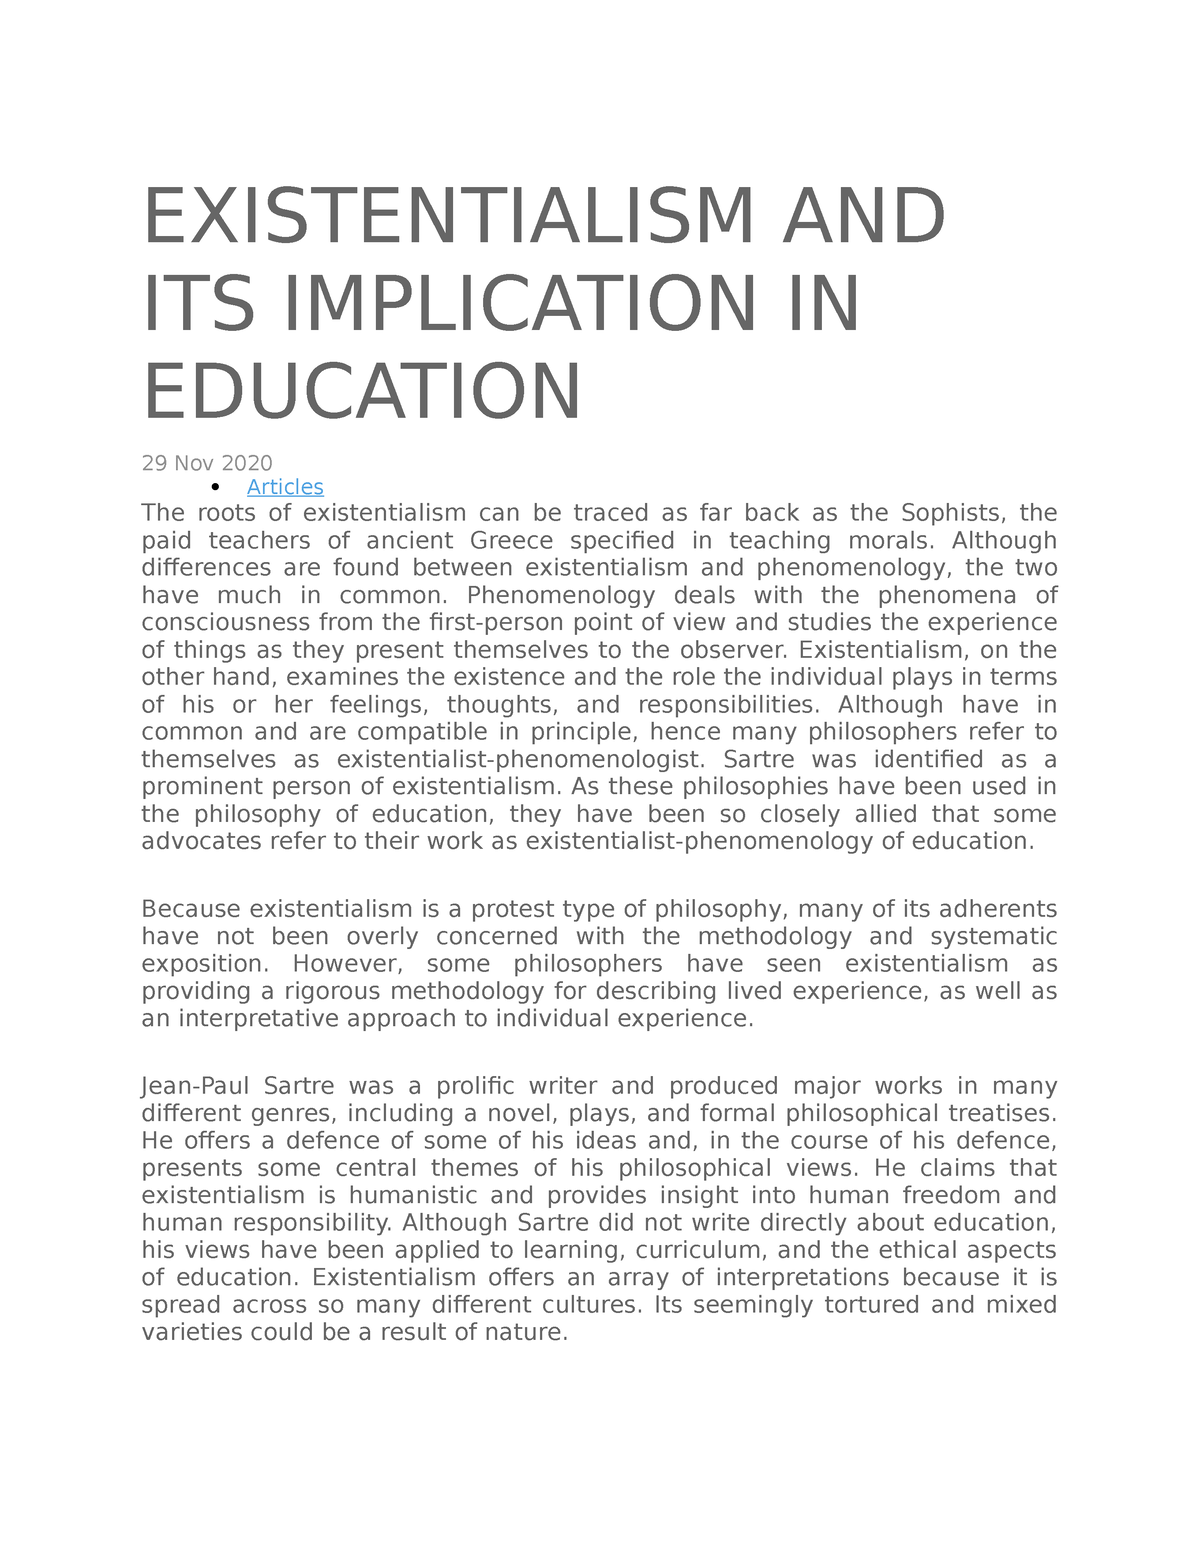 importance of existentialism in education essay